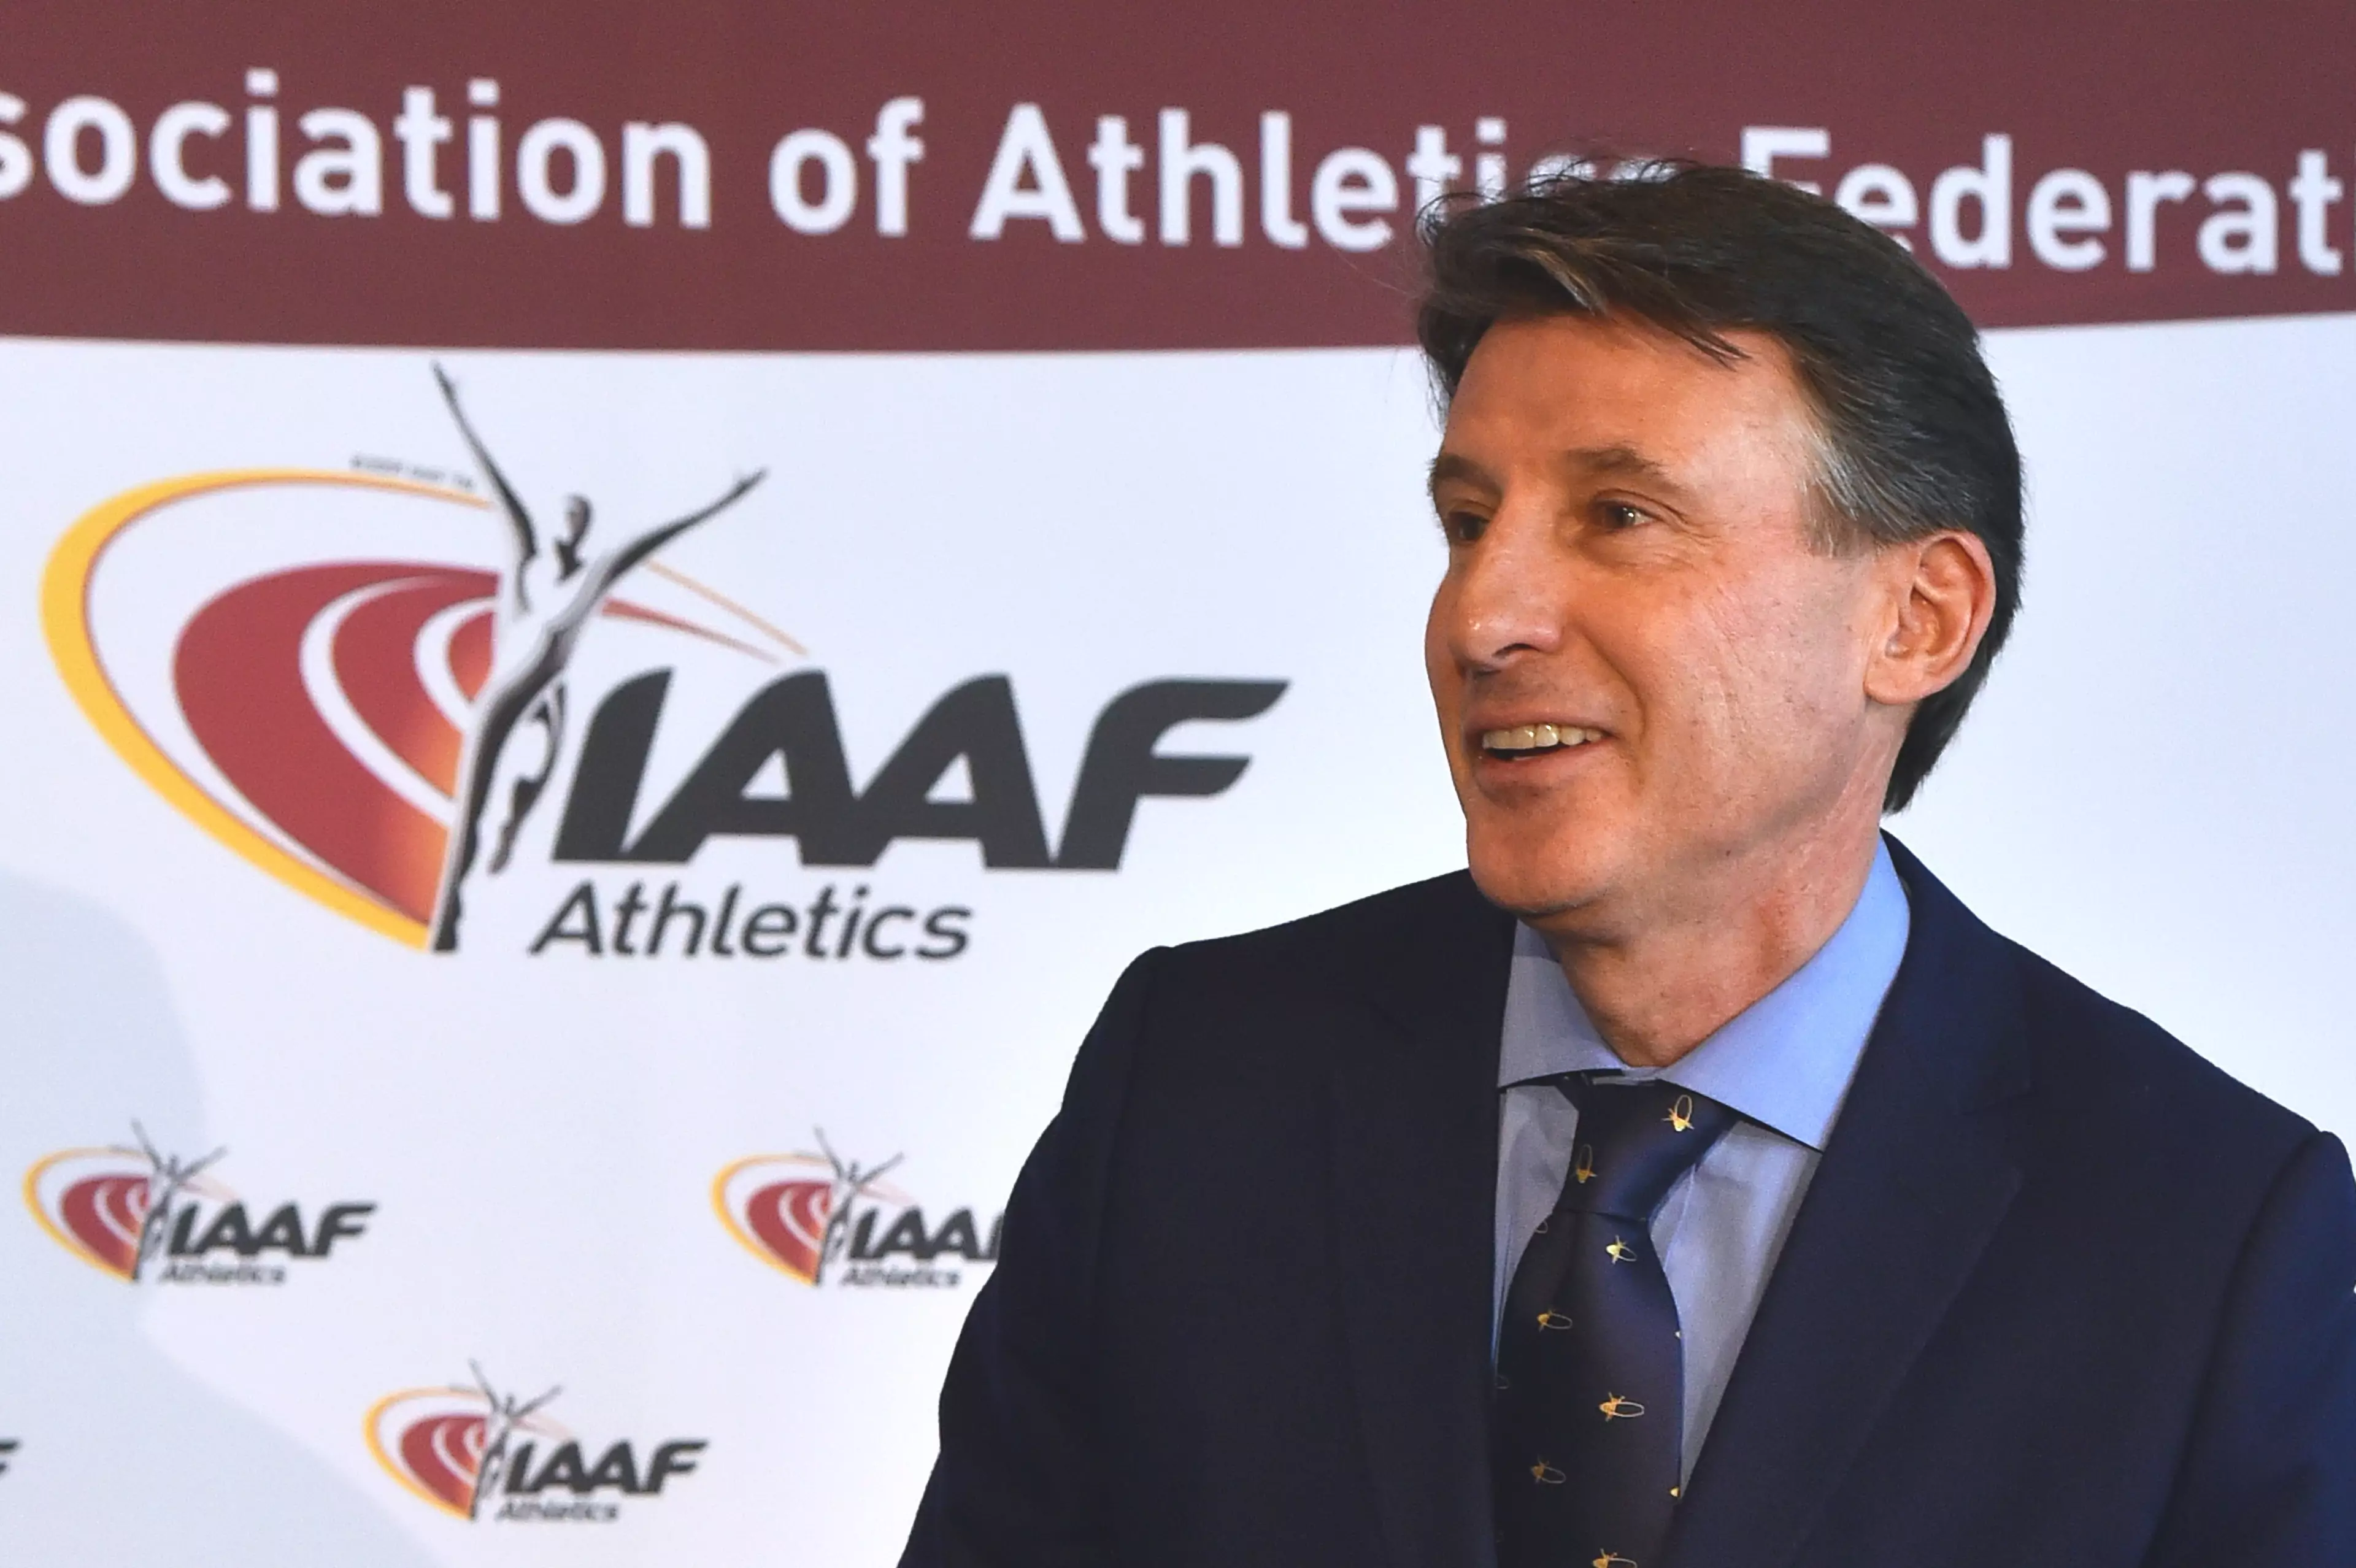 IAAF Confirm Ban On Russian Track And Field For Olympics